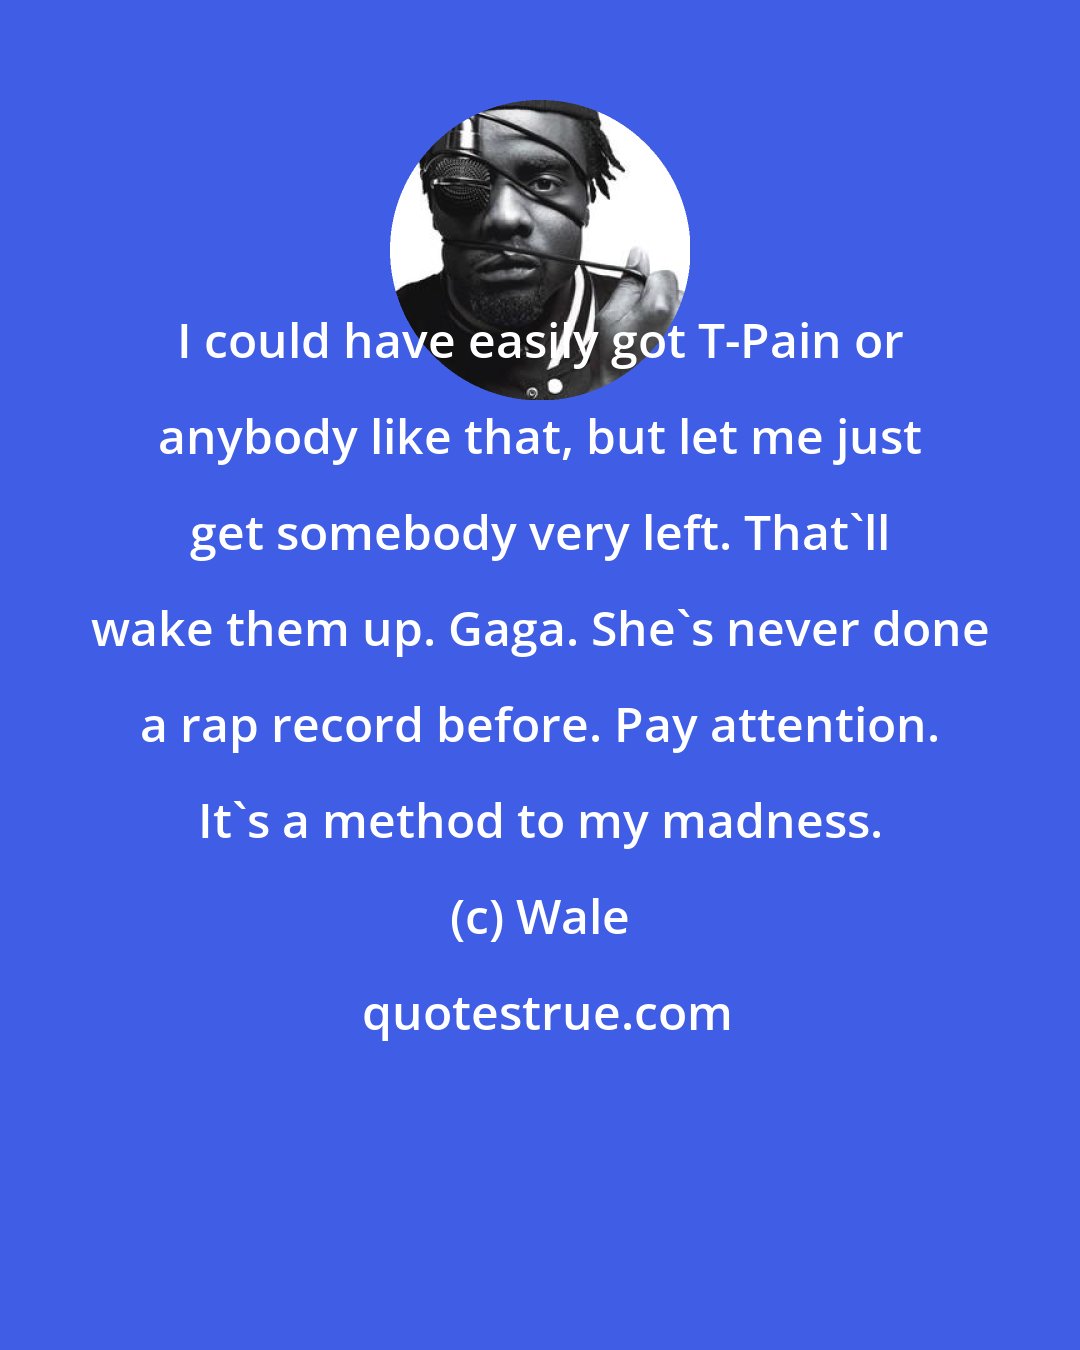 Wale: I could have easily got T-Pain or anybody like that, but let me just get somebody very left. That'll wake them up. Gaga. She's never done a rap record before. Pay attention. It's a method to my madness.